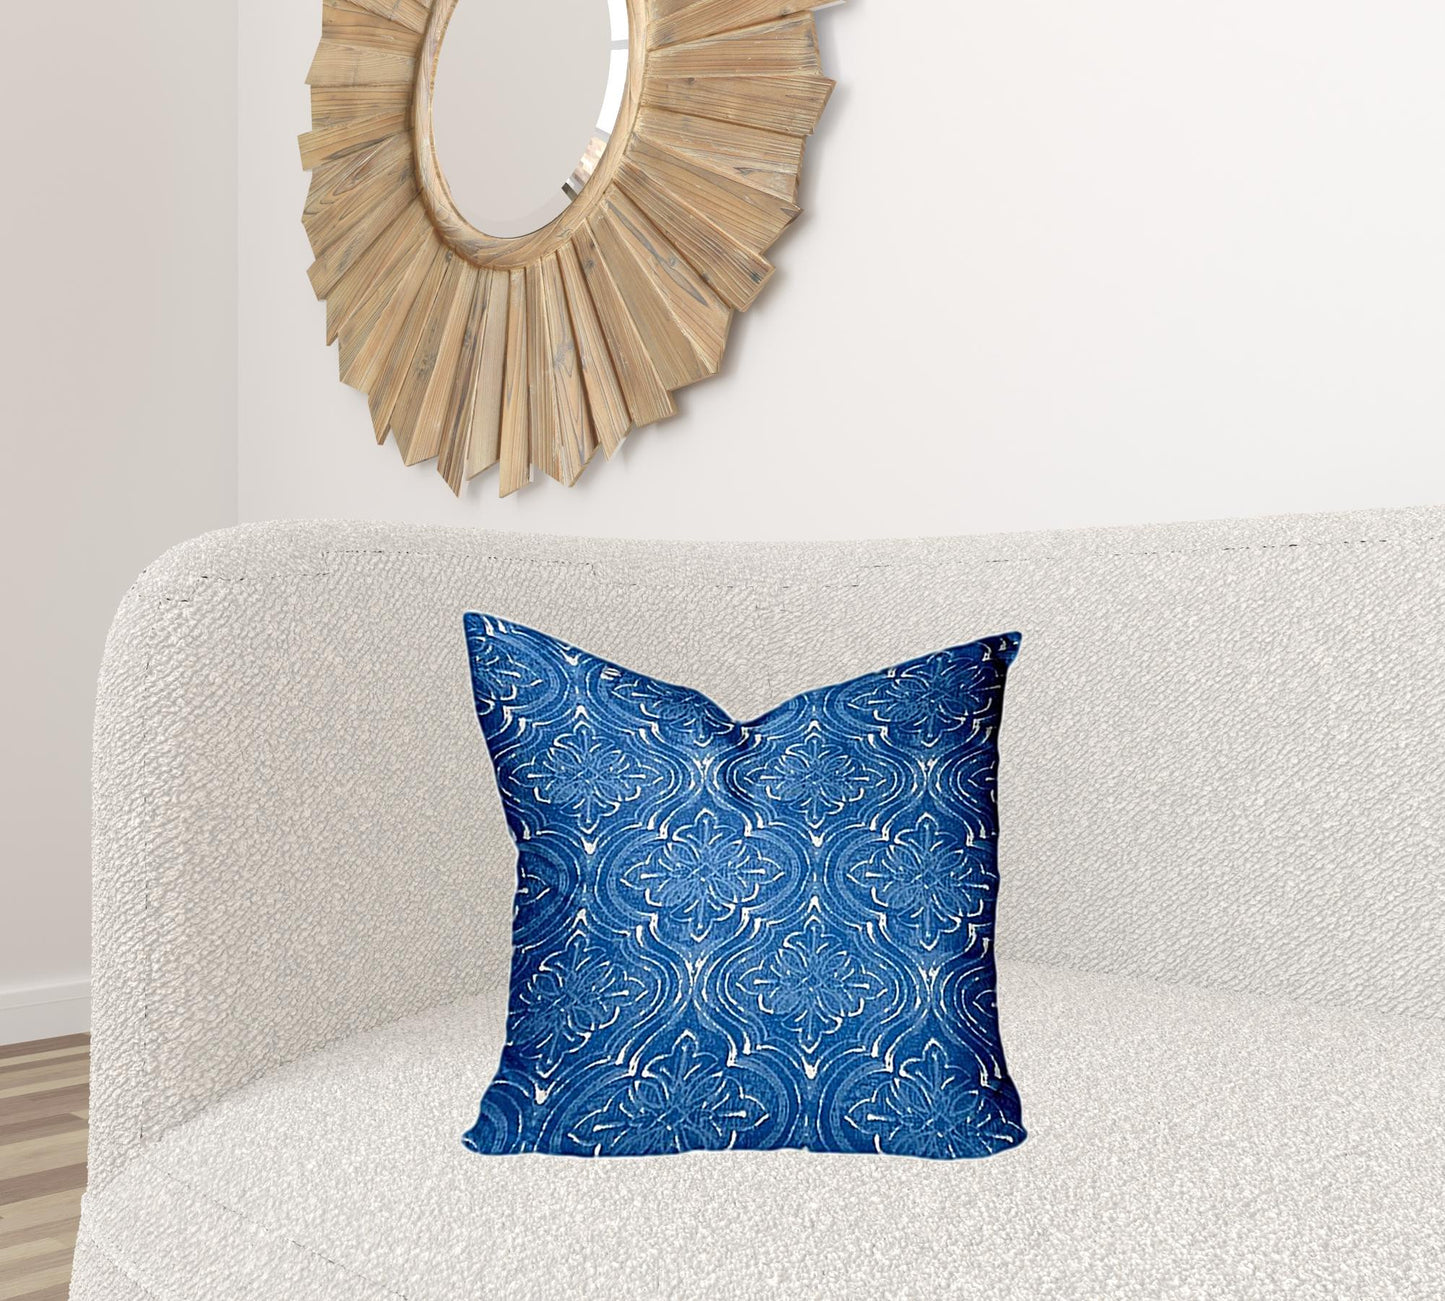 20" X 20" Blue And White Zippered Ikat Throw Indoor Outdoor Pillow Cover